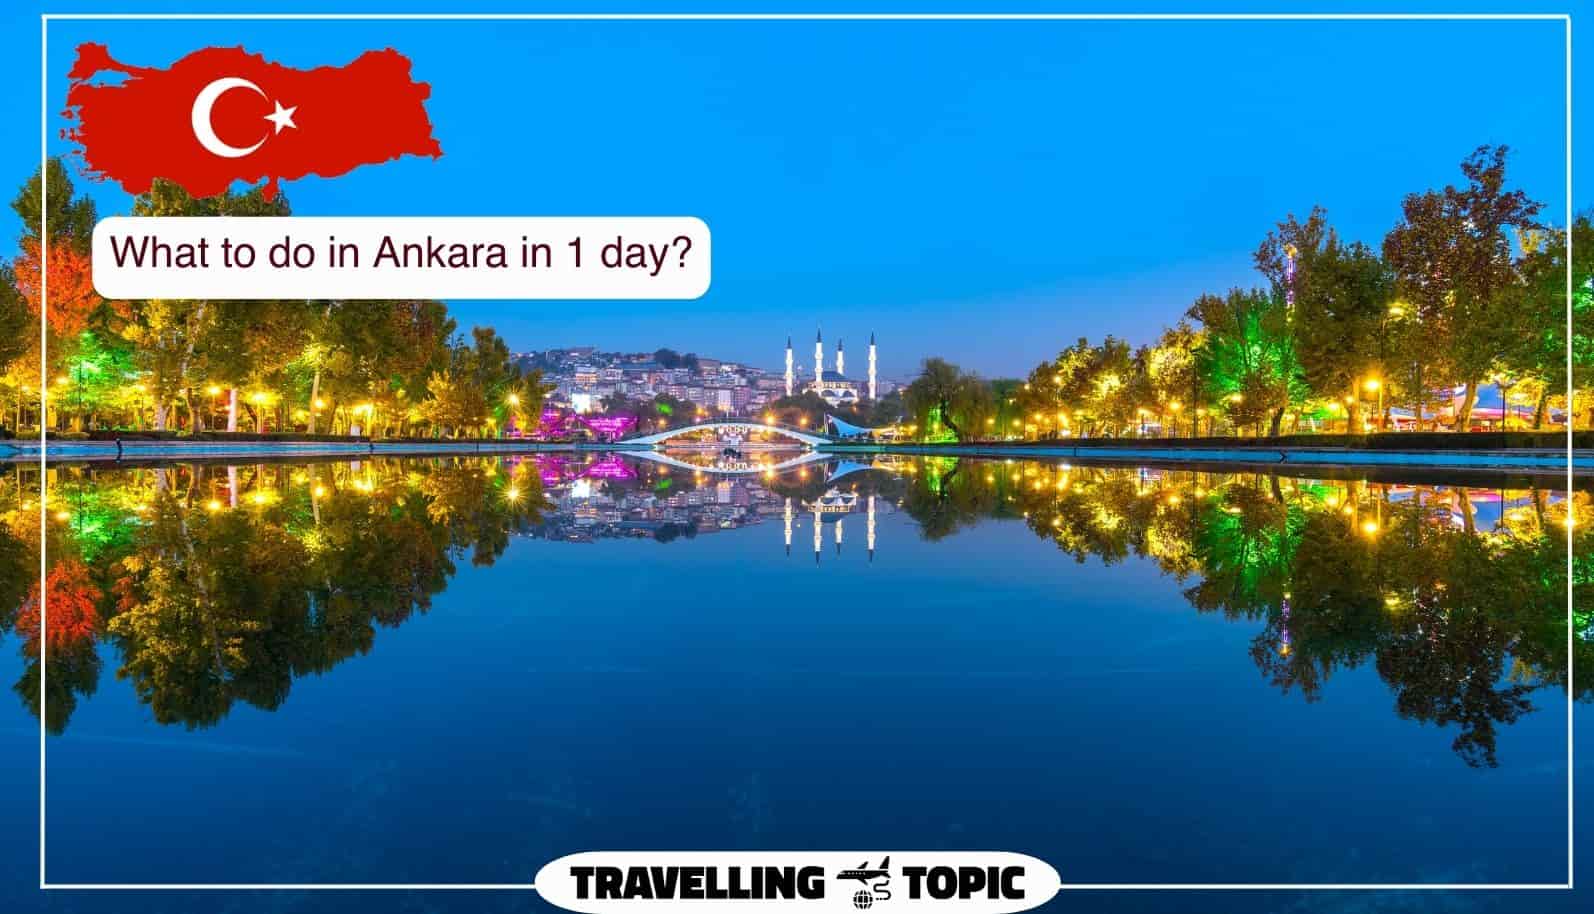 What to do in Ankara in 1 day